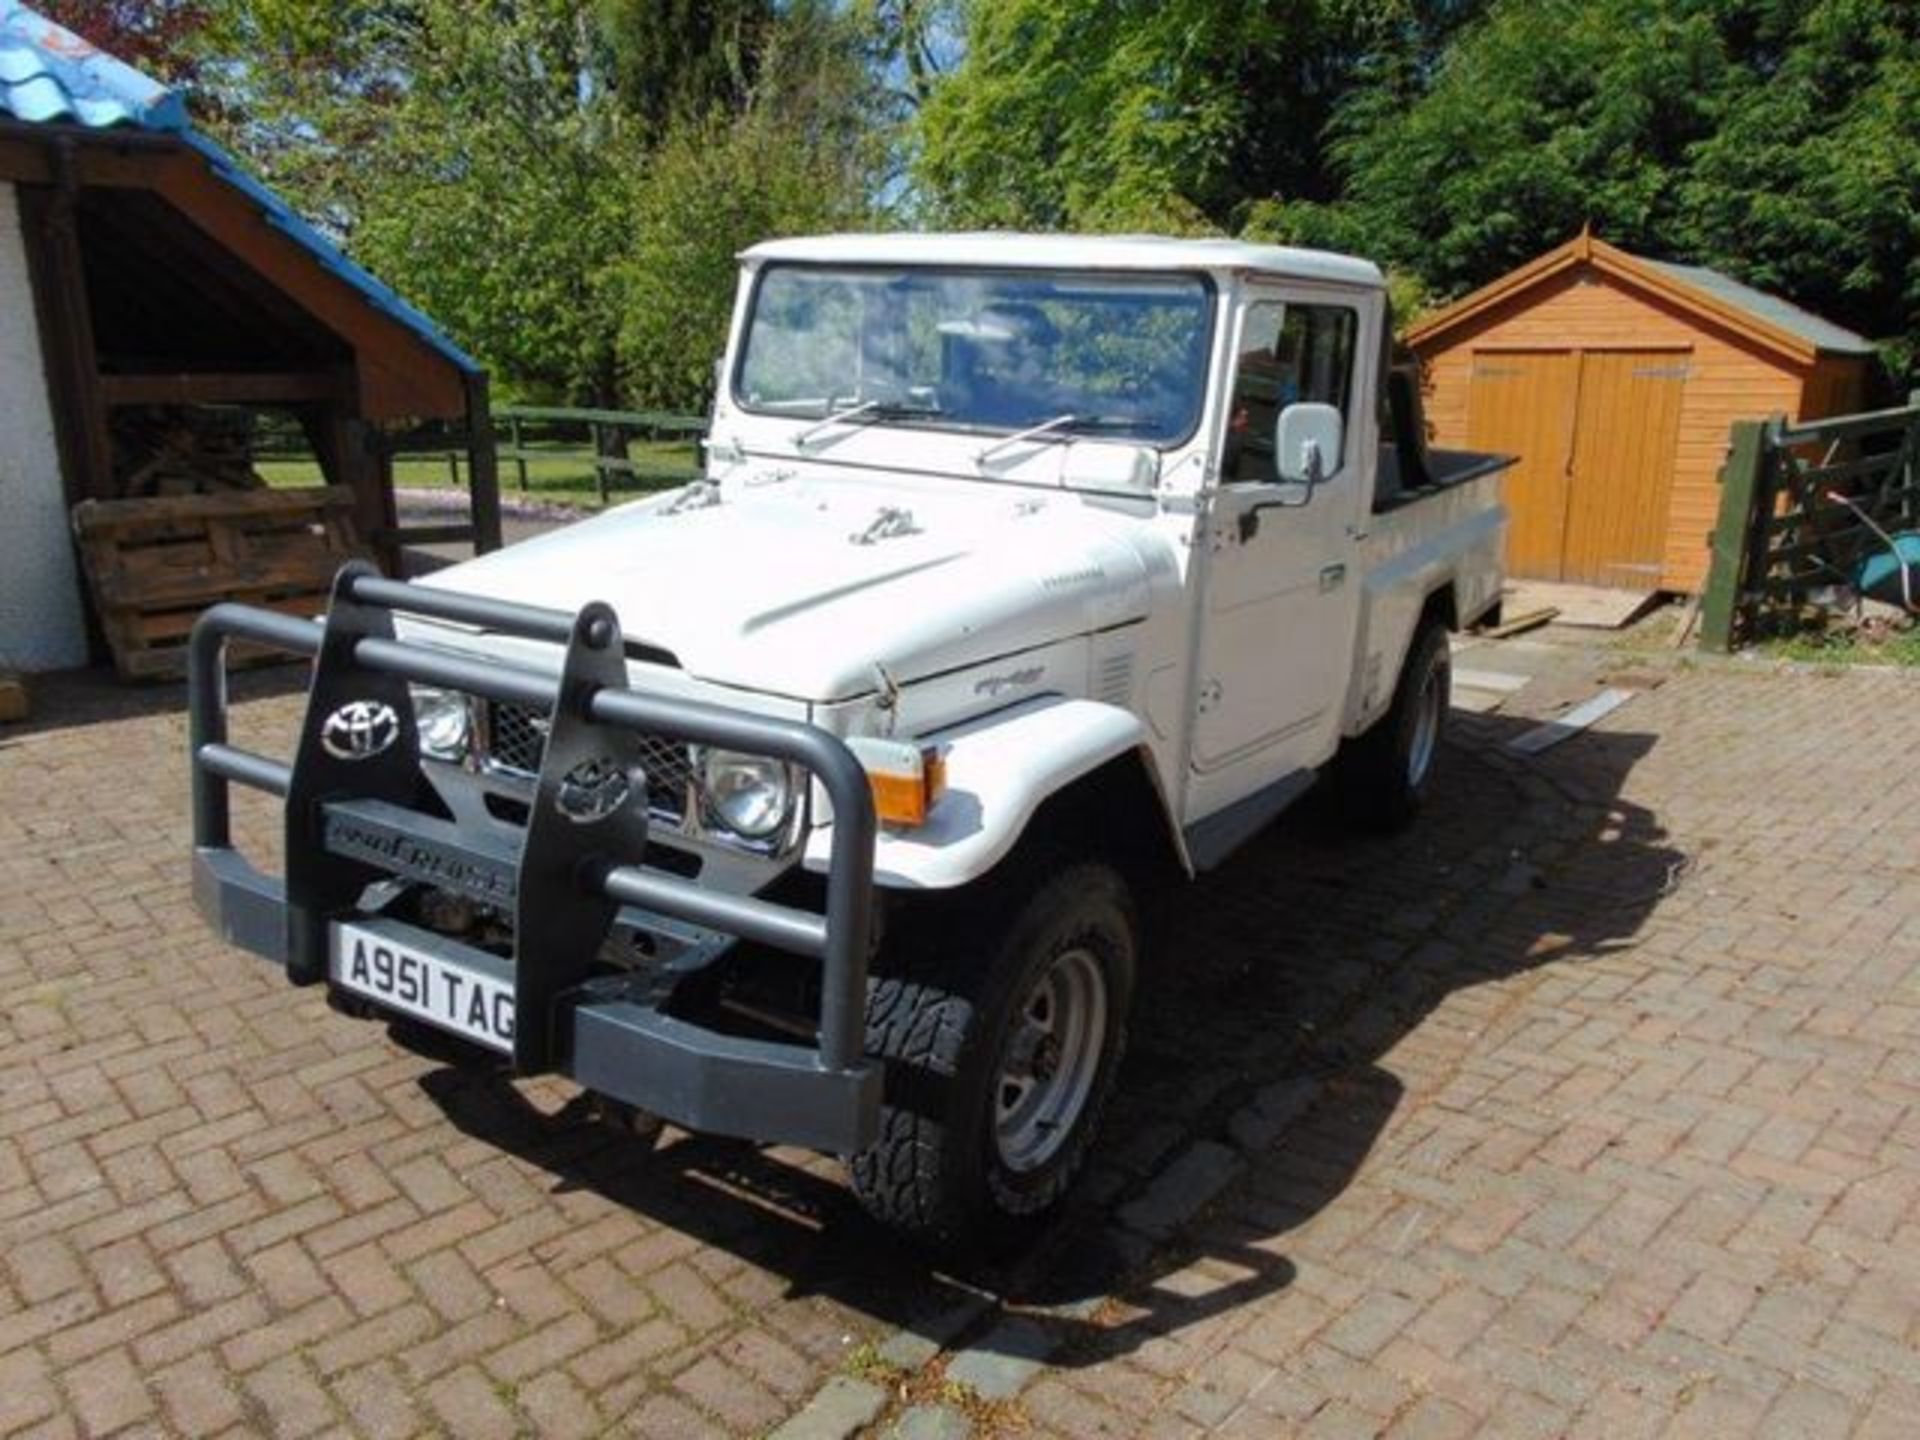 TOYOTA, LANDCRUISER FJ45 - 4230cc, Chassis number FJ45R408909 - originally supplied to South